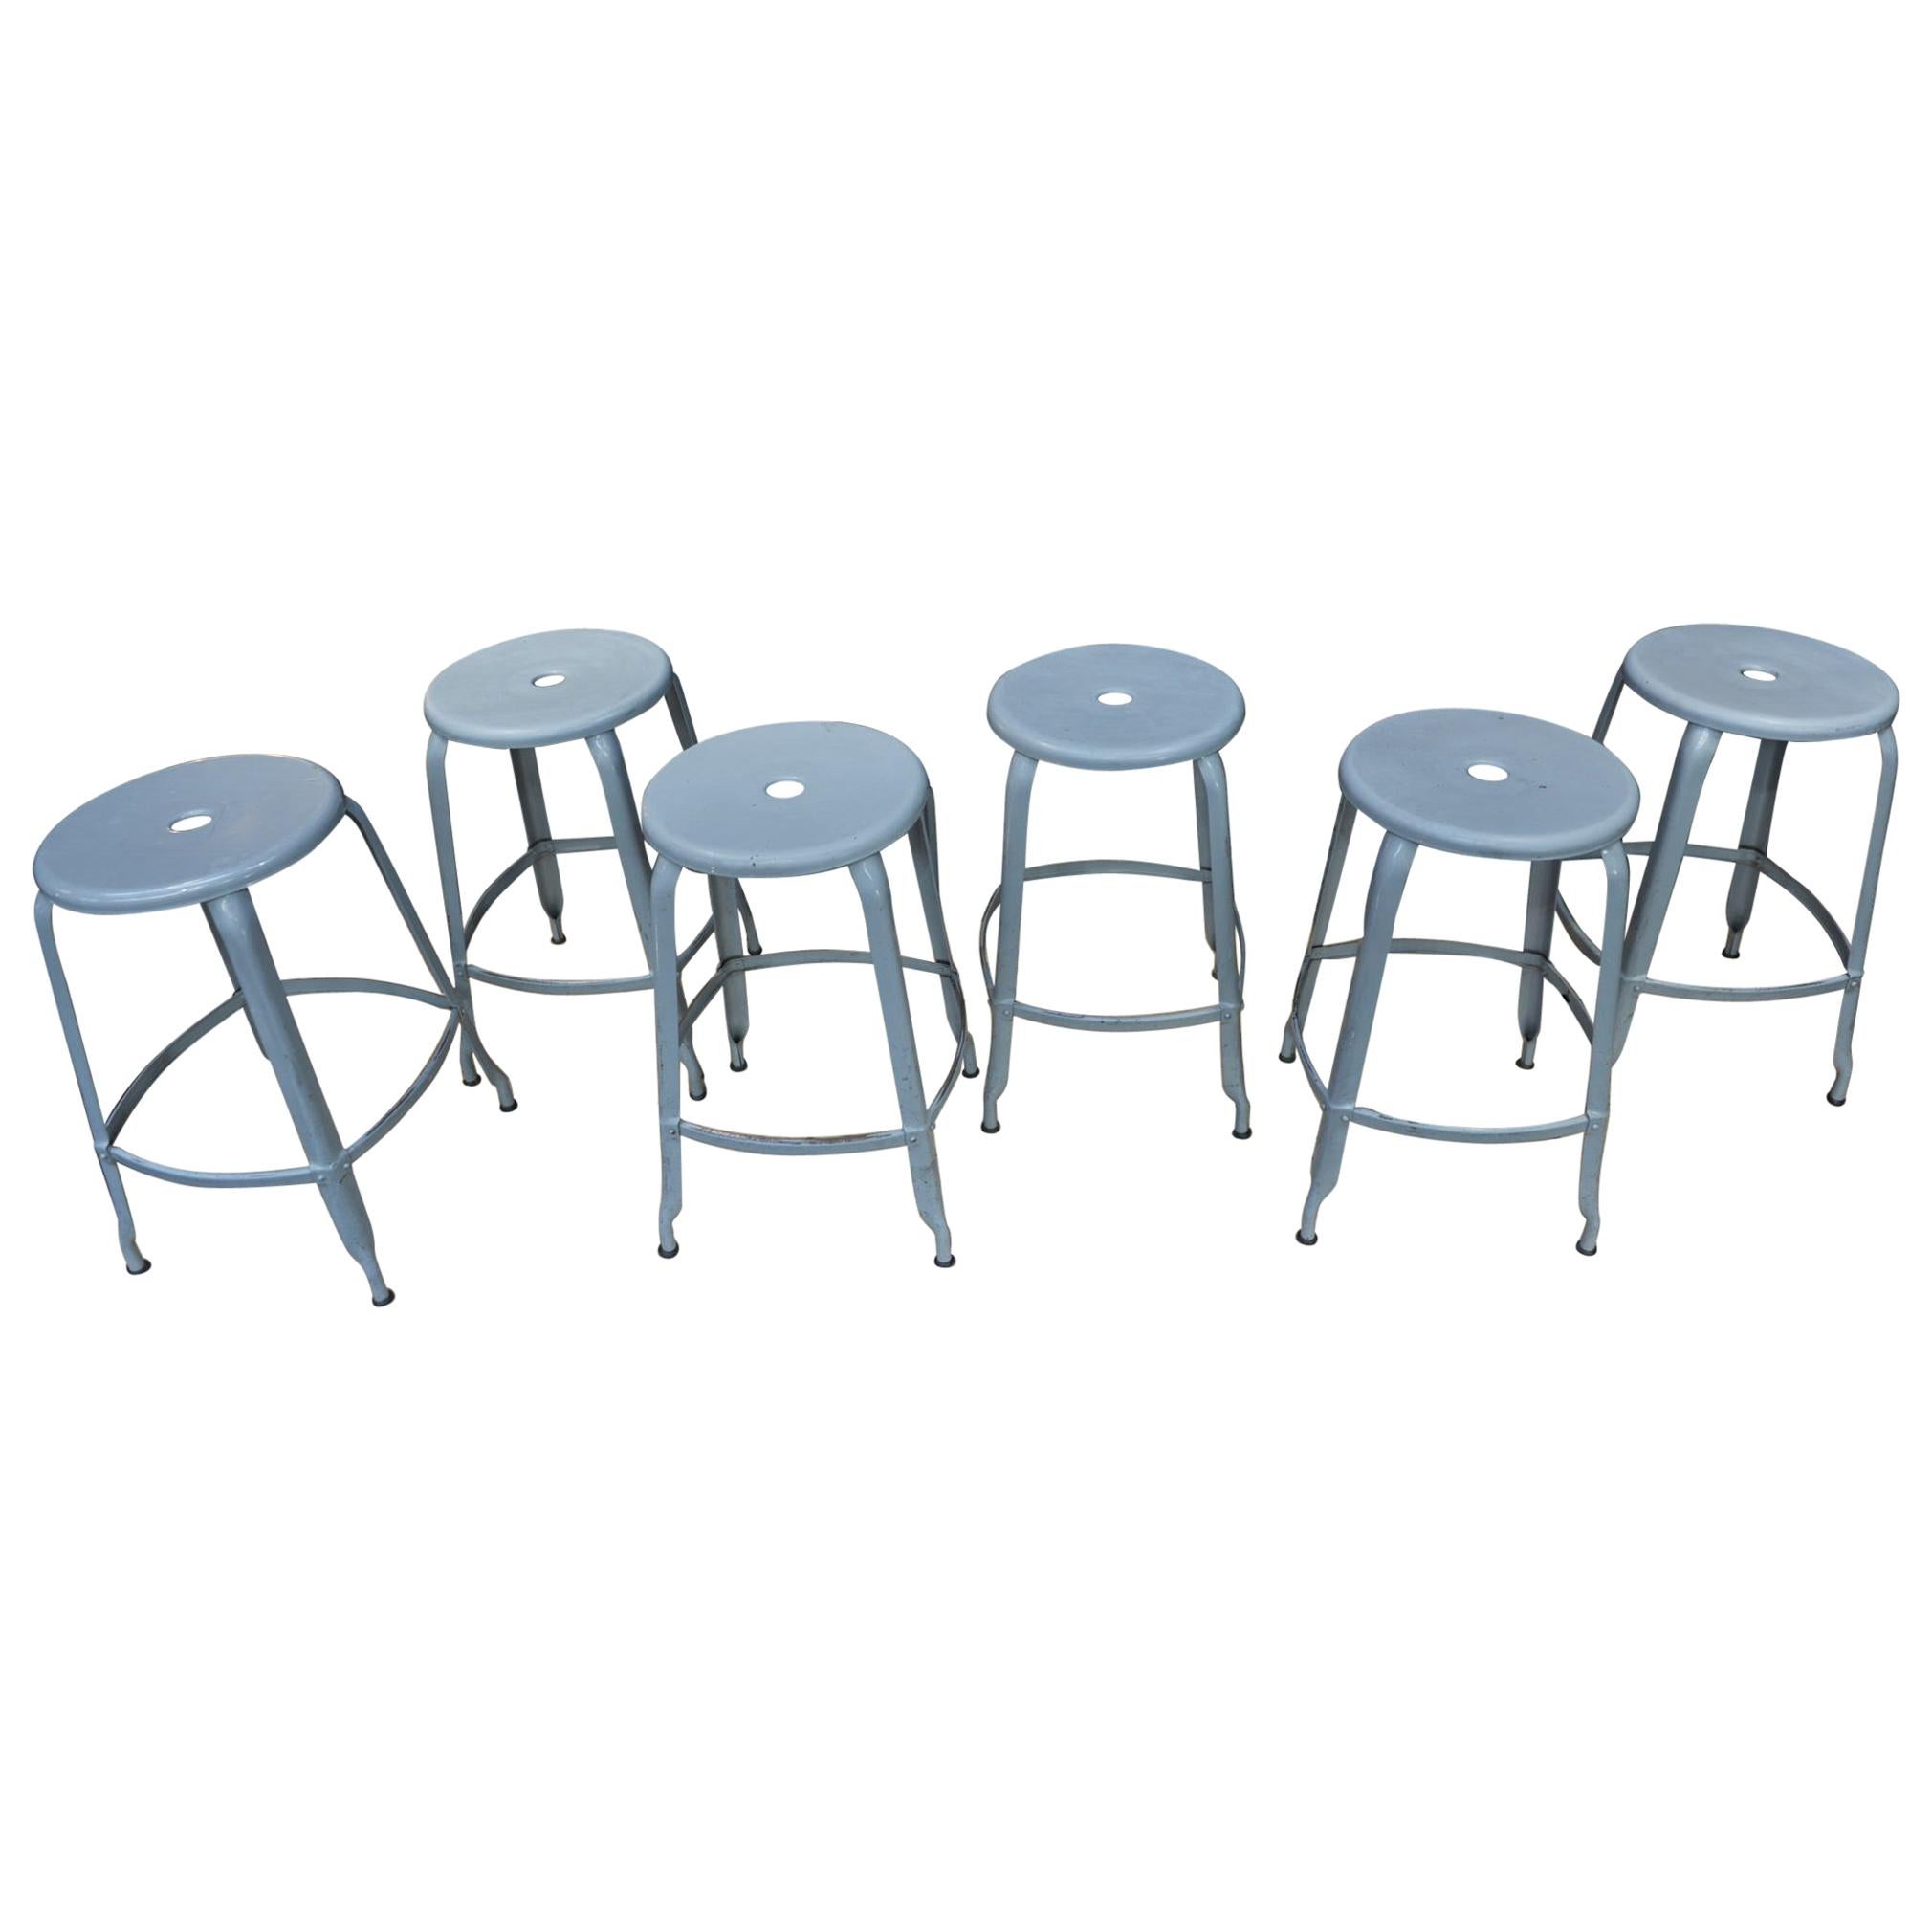 6 Iron factory Stools by "Nicole", France, circa 1950 For Sale